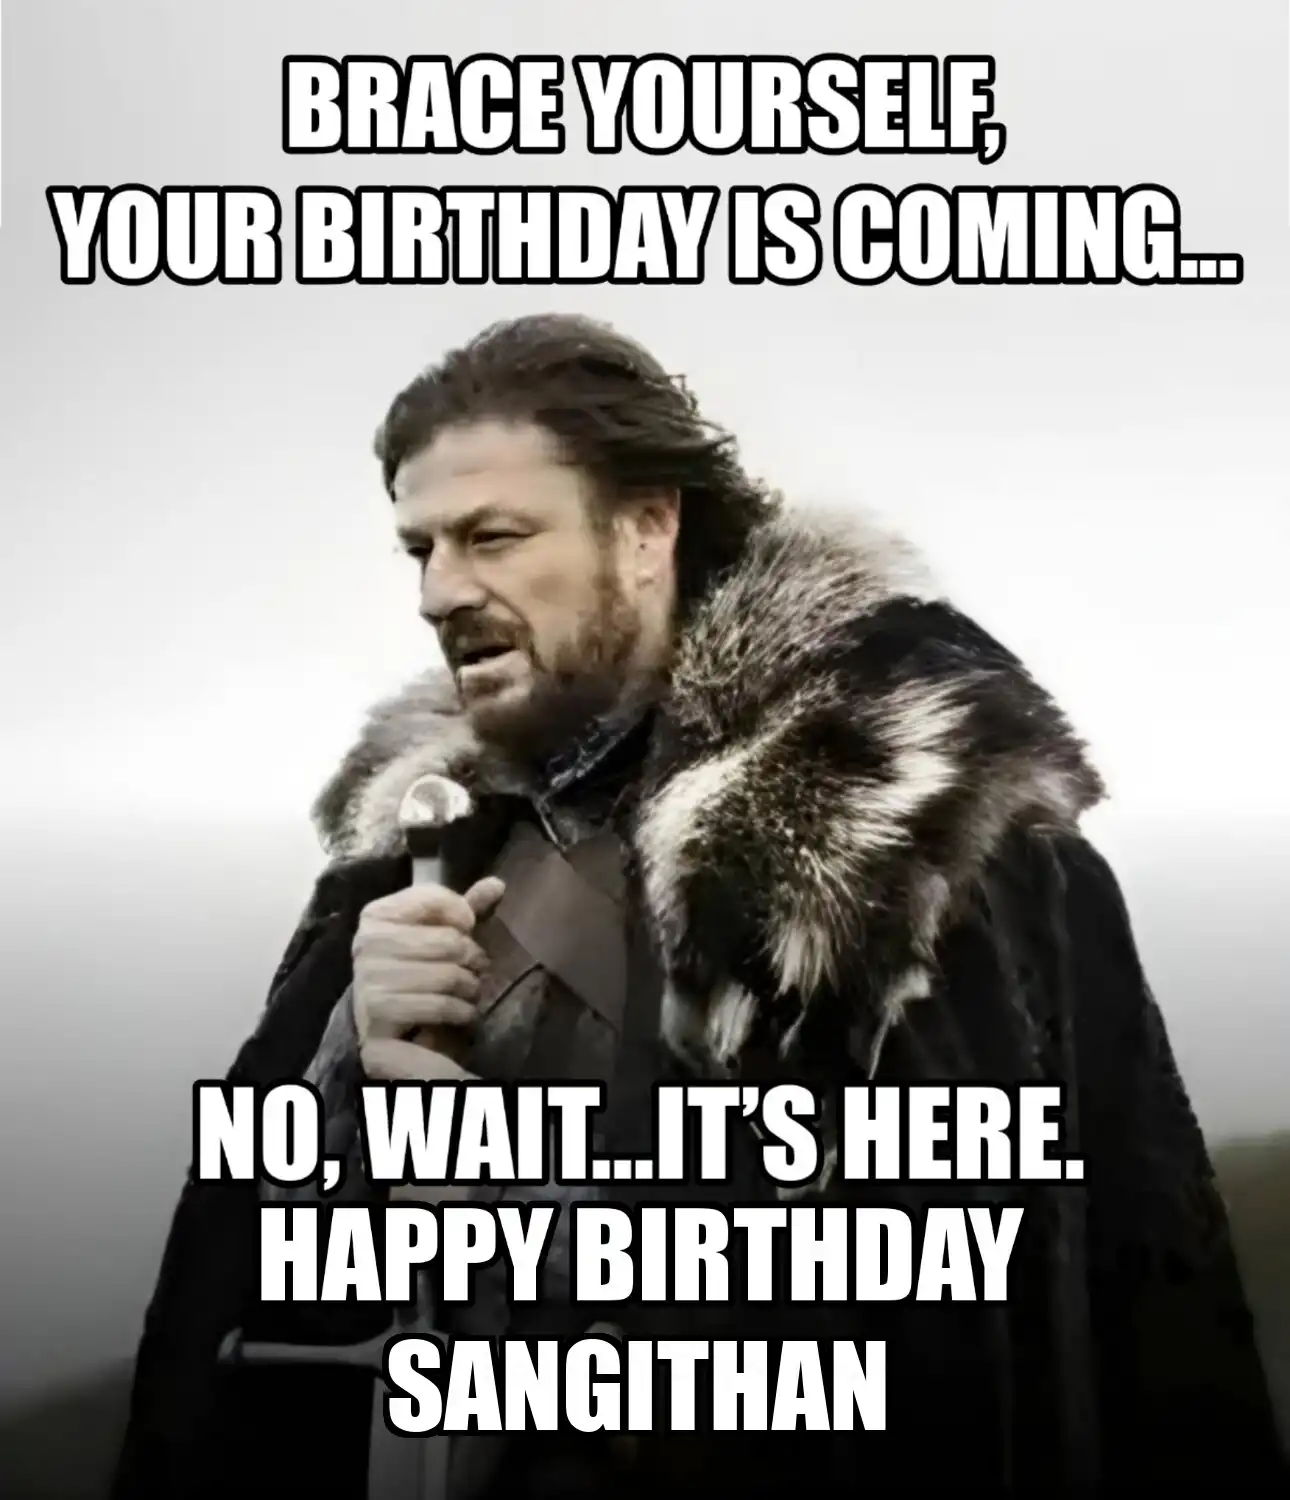 Happy Birthday Sangithan Brace Yourself Your Birthday Is Coming Meme